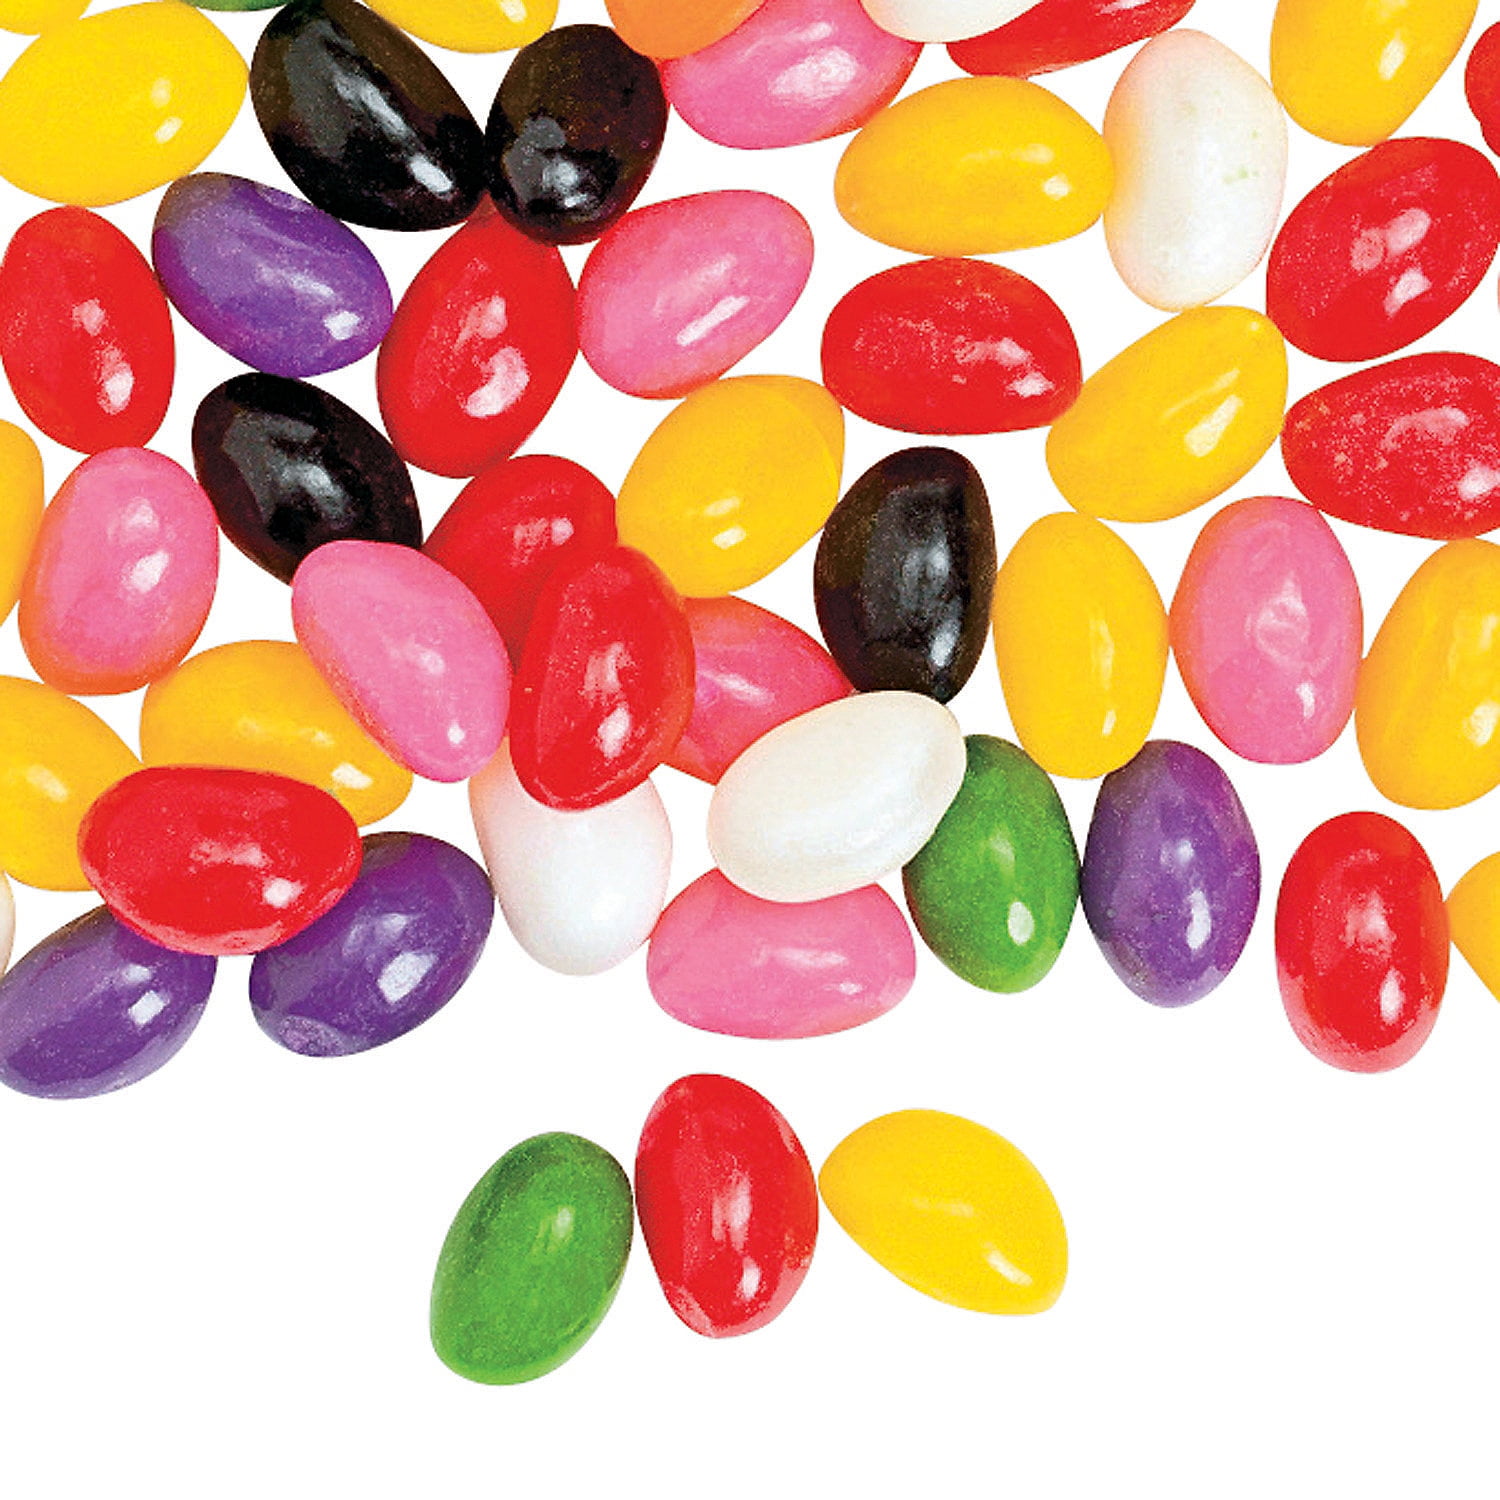 Jelly bean candy